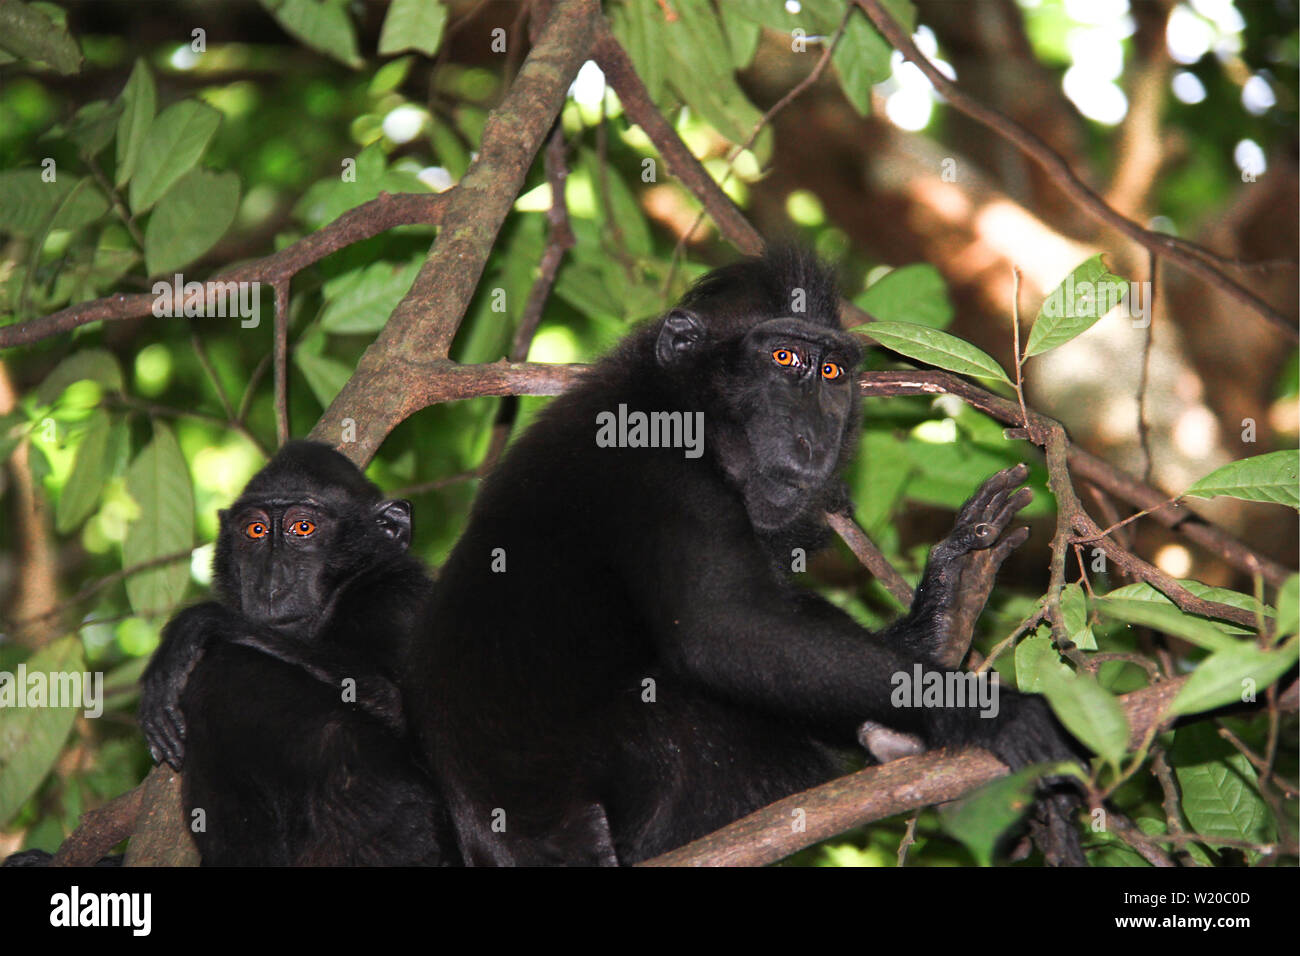 Humanlike Celebes Crested macaques are looking into the camera, sitting on trees in the jungle of Sulawesi, Indonesia. Stock Photo